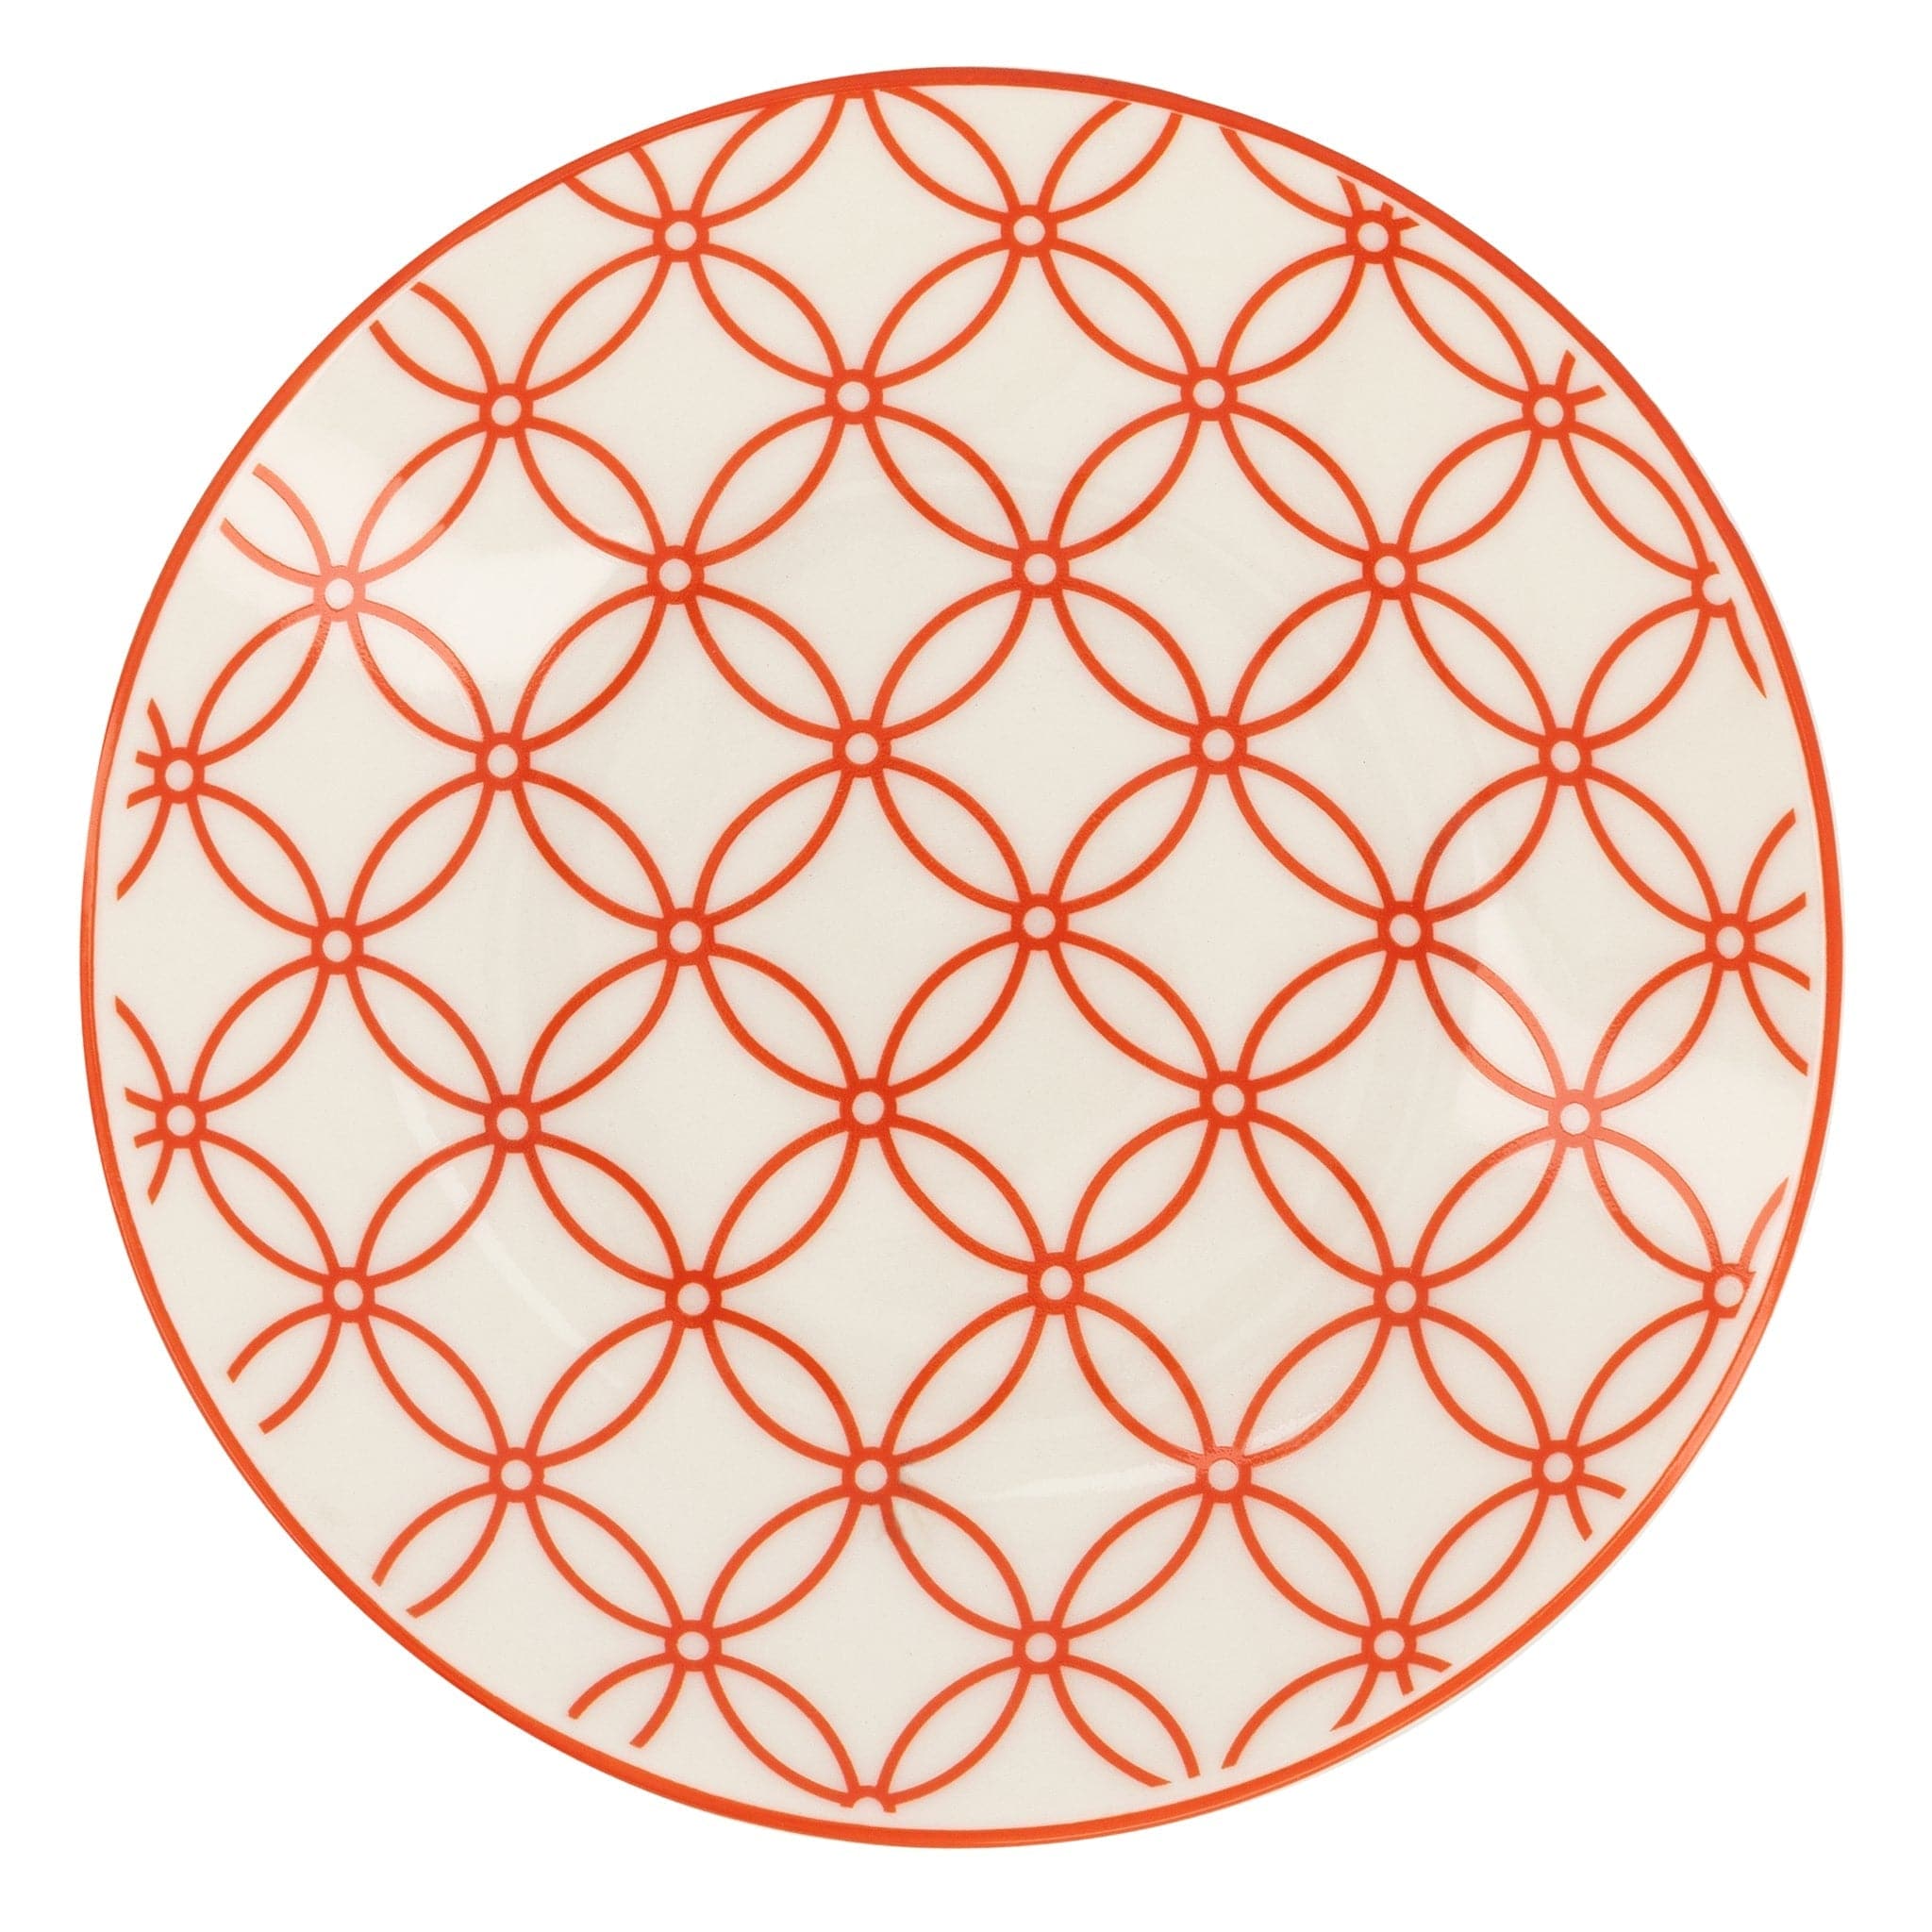 New Bone China Printed 12cm Plate - Red Circles 6926101889709 only5pounds-com